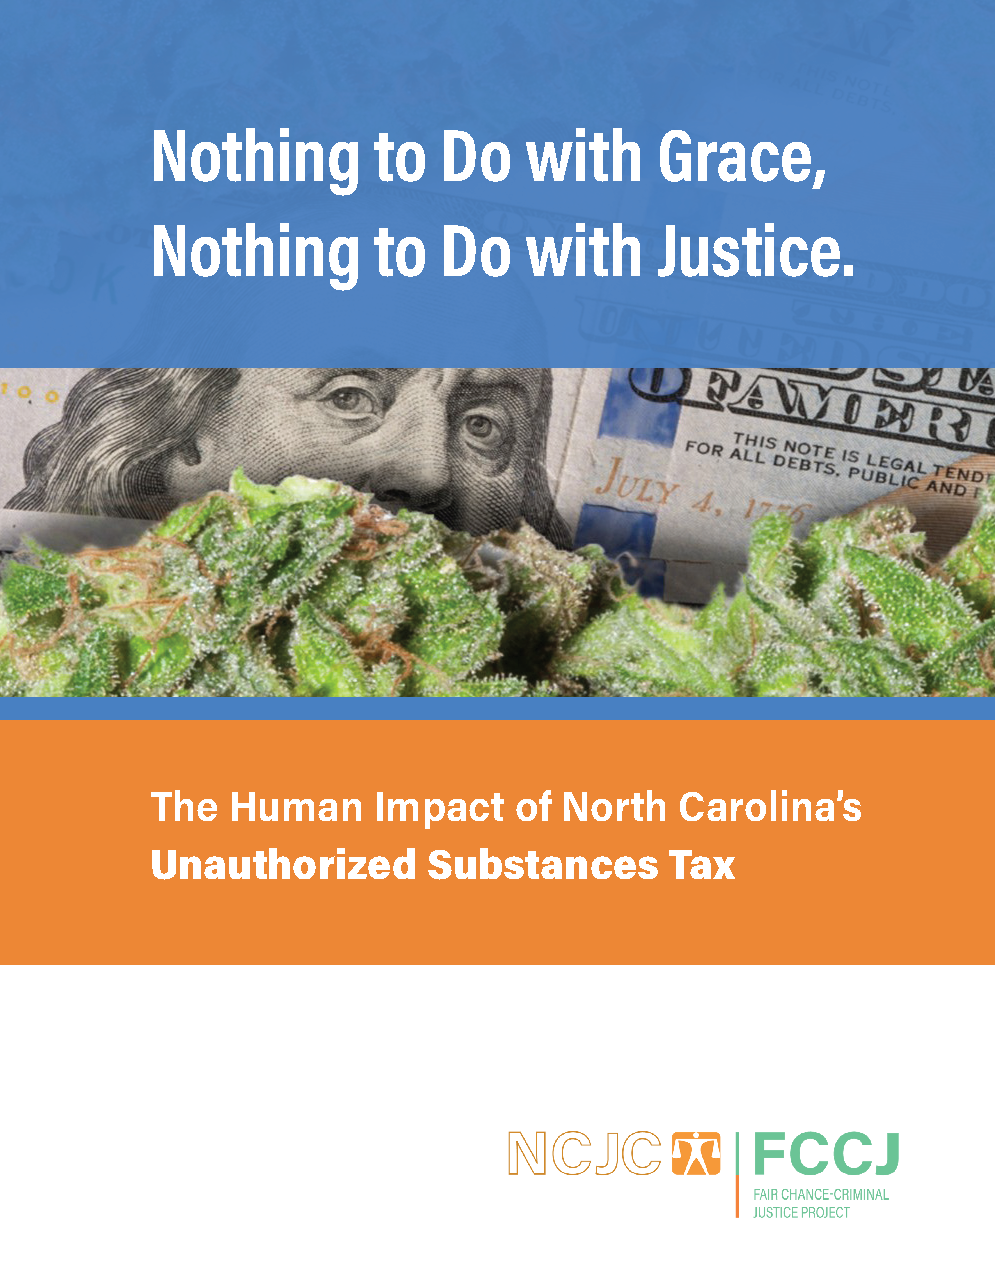 “Nothing to do with Grace, Nothing to do with Justice”: The Human Impact of North Carolina’s Unauthorized Substances Tax